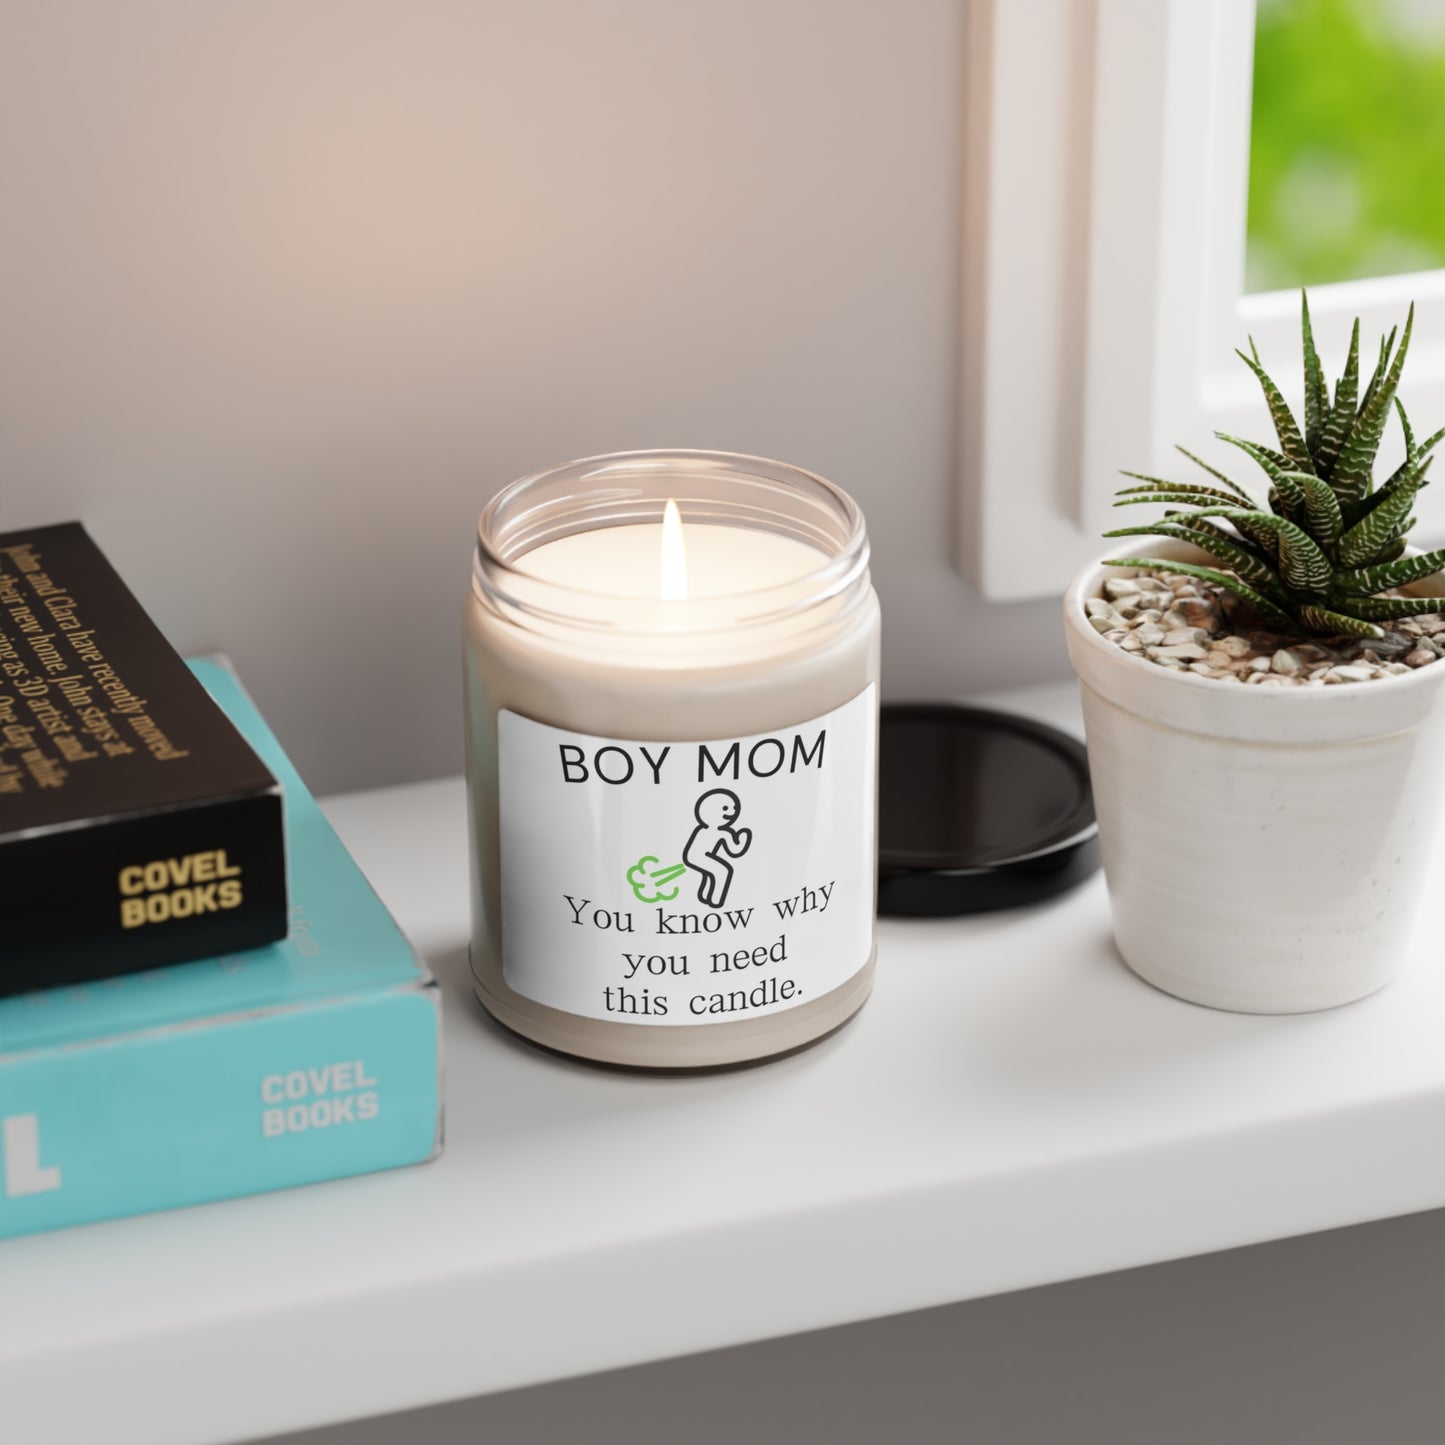 Scented Soy Candle, 9oz.  Boy mom, you know why you need this candle.